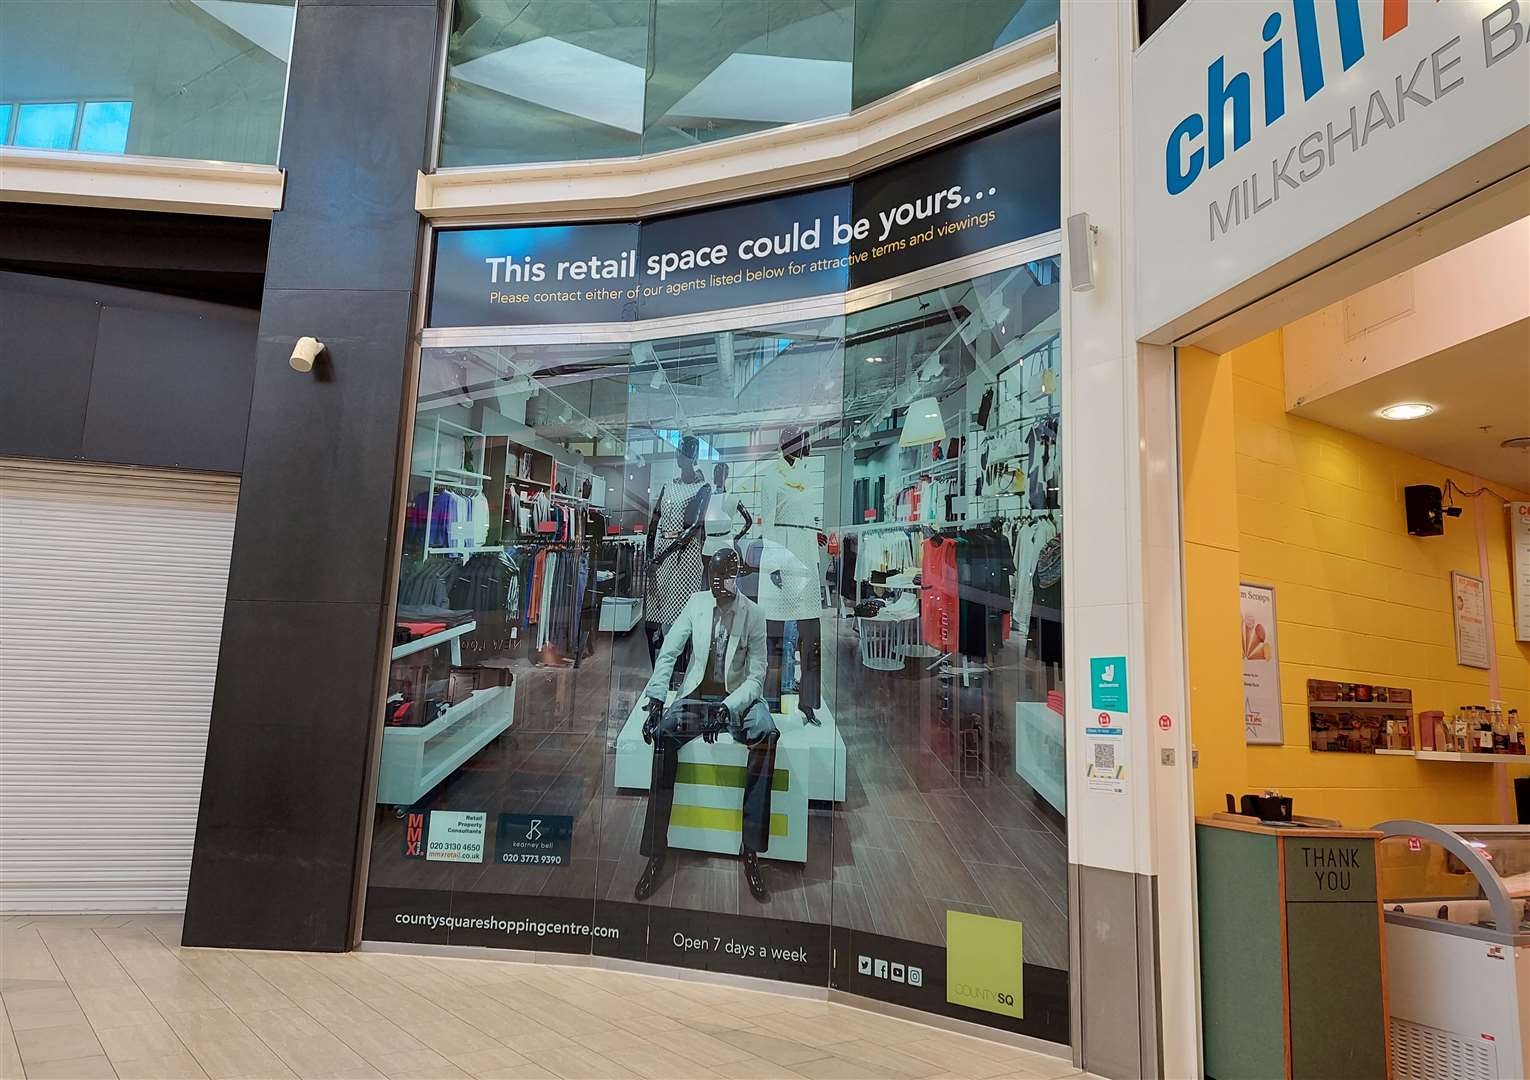 New signs were put up in the abandoned Debenhams store late last year